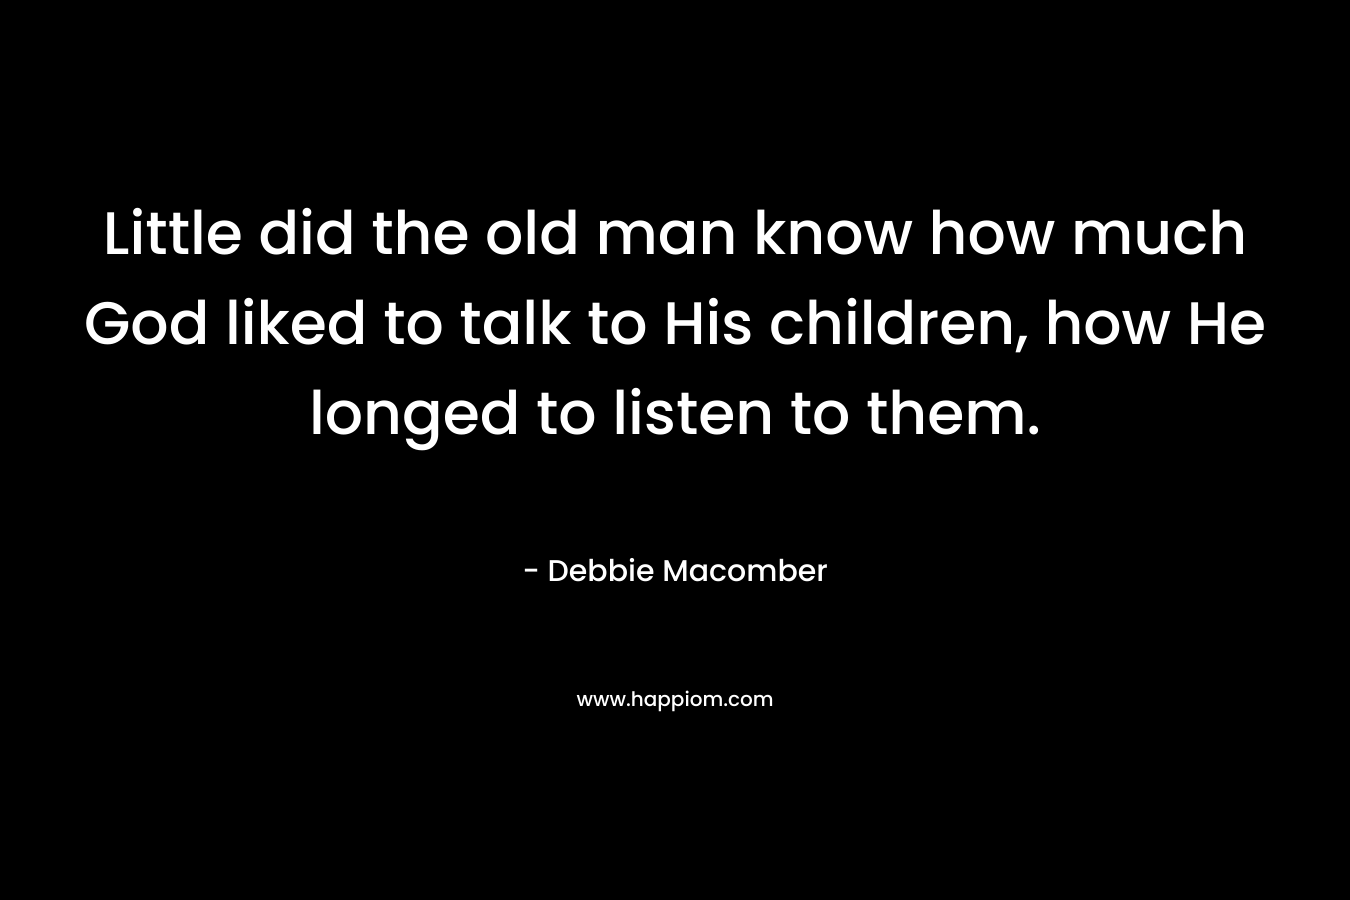 Little did the old man know how much God liked to talk to His children, how He longed to listen to them.